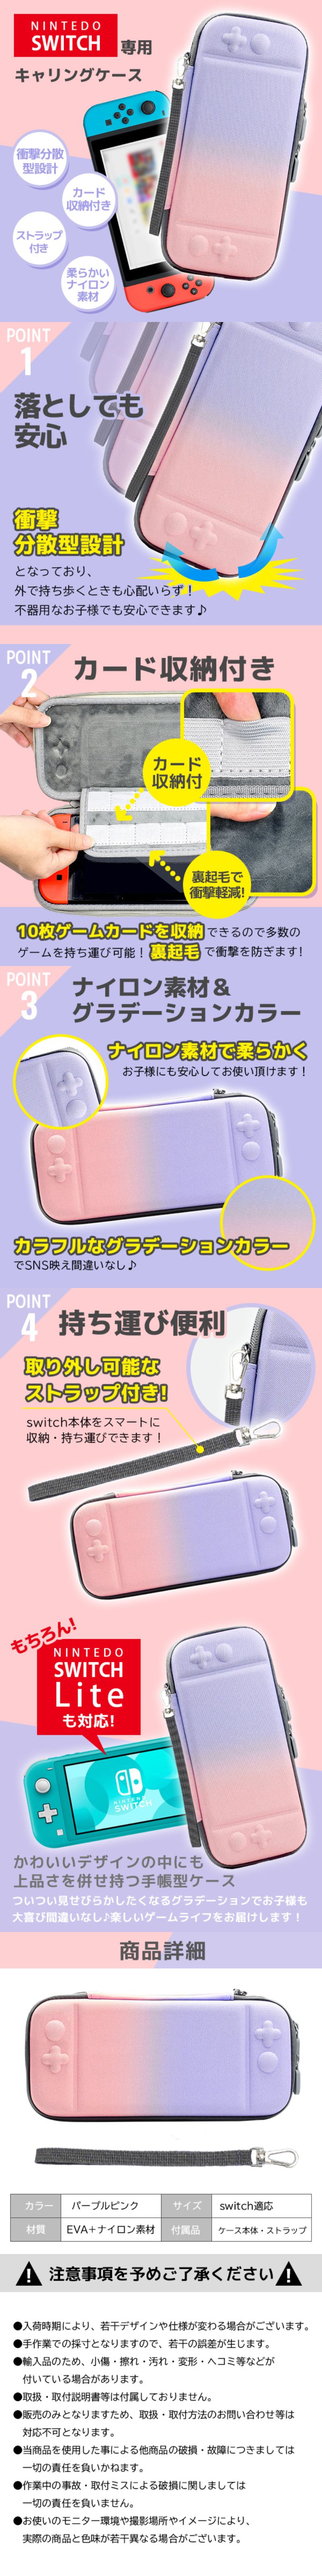 switchカバー紫ピンク